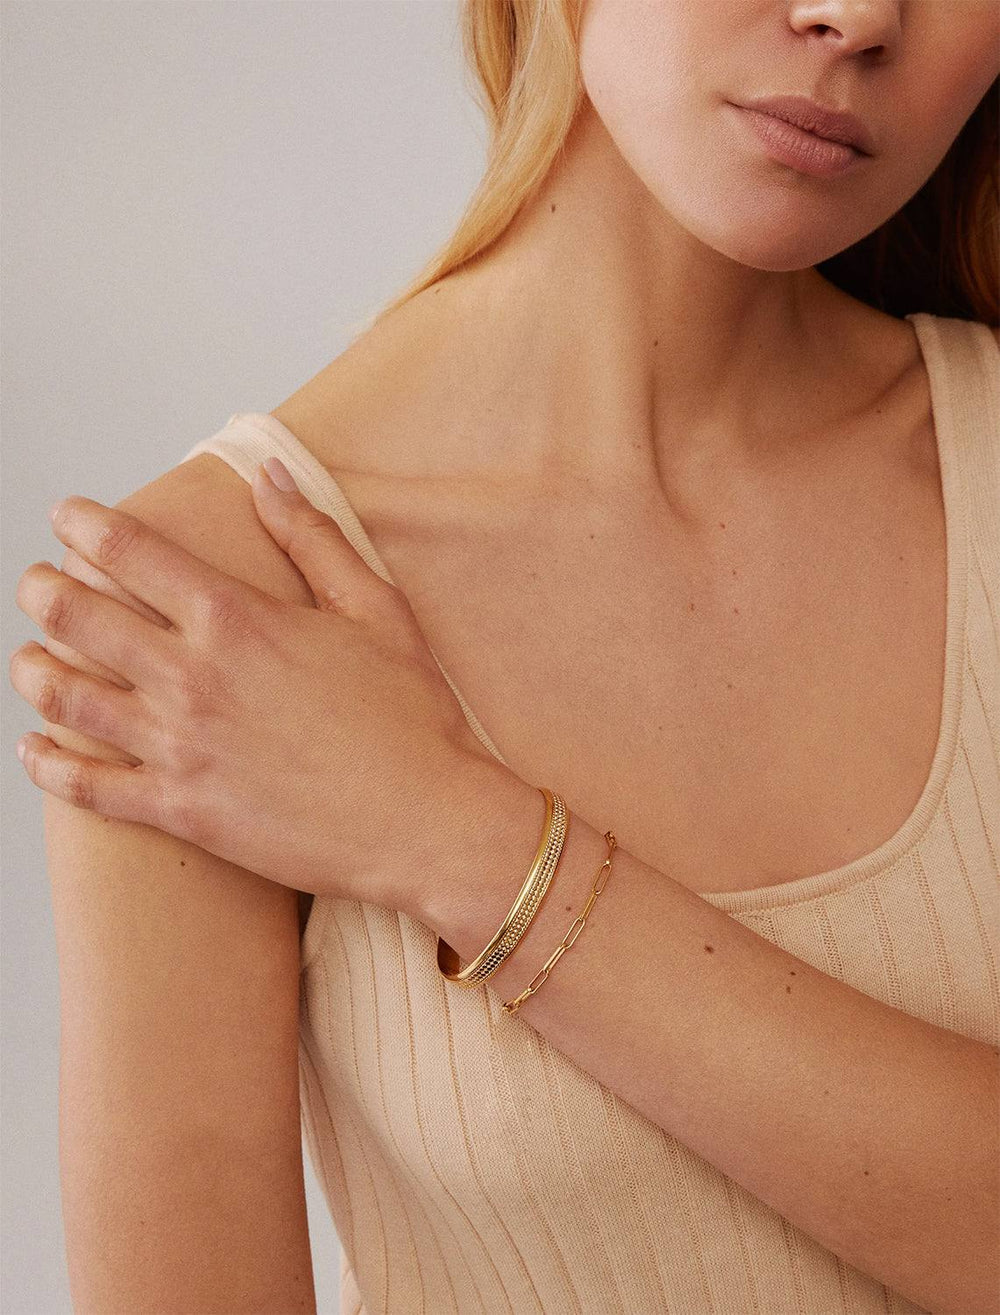 Model wearing Anna Beck's Classic Wide Band Stacking Cuff in Gold.